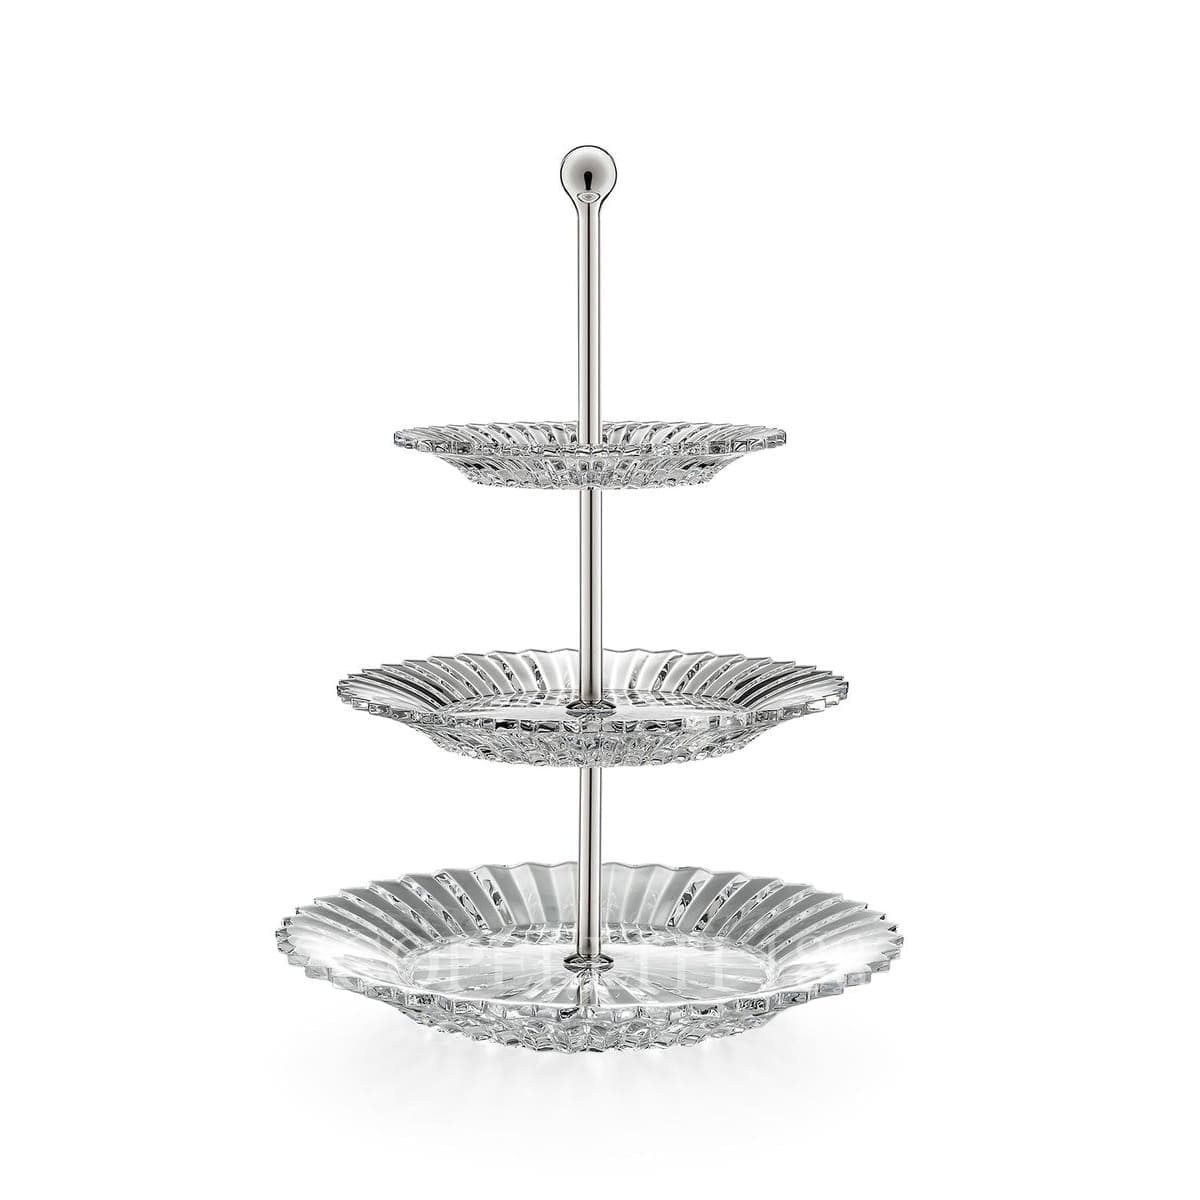 Baccarat Mille Nuits crystal Centerpiece